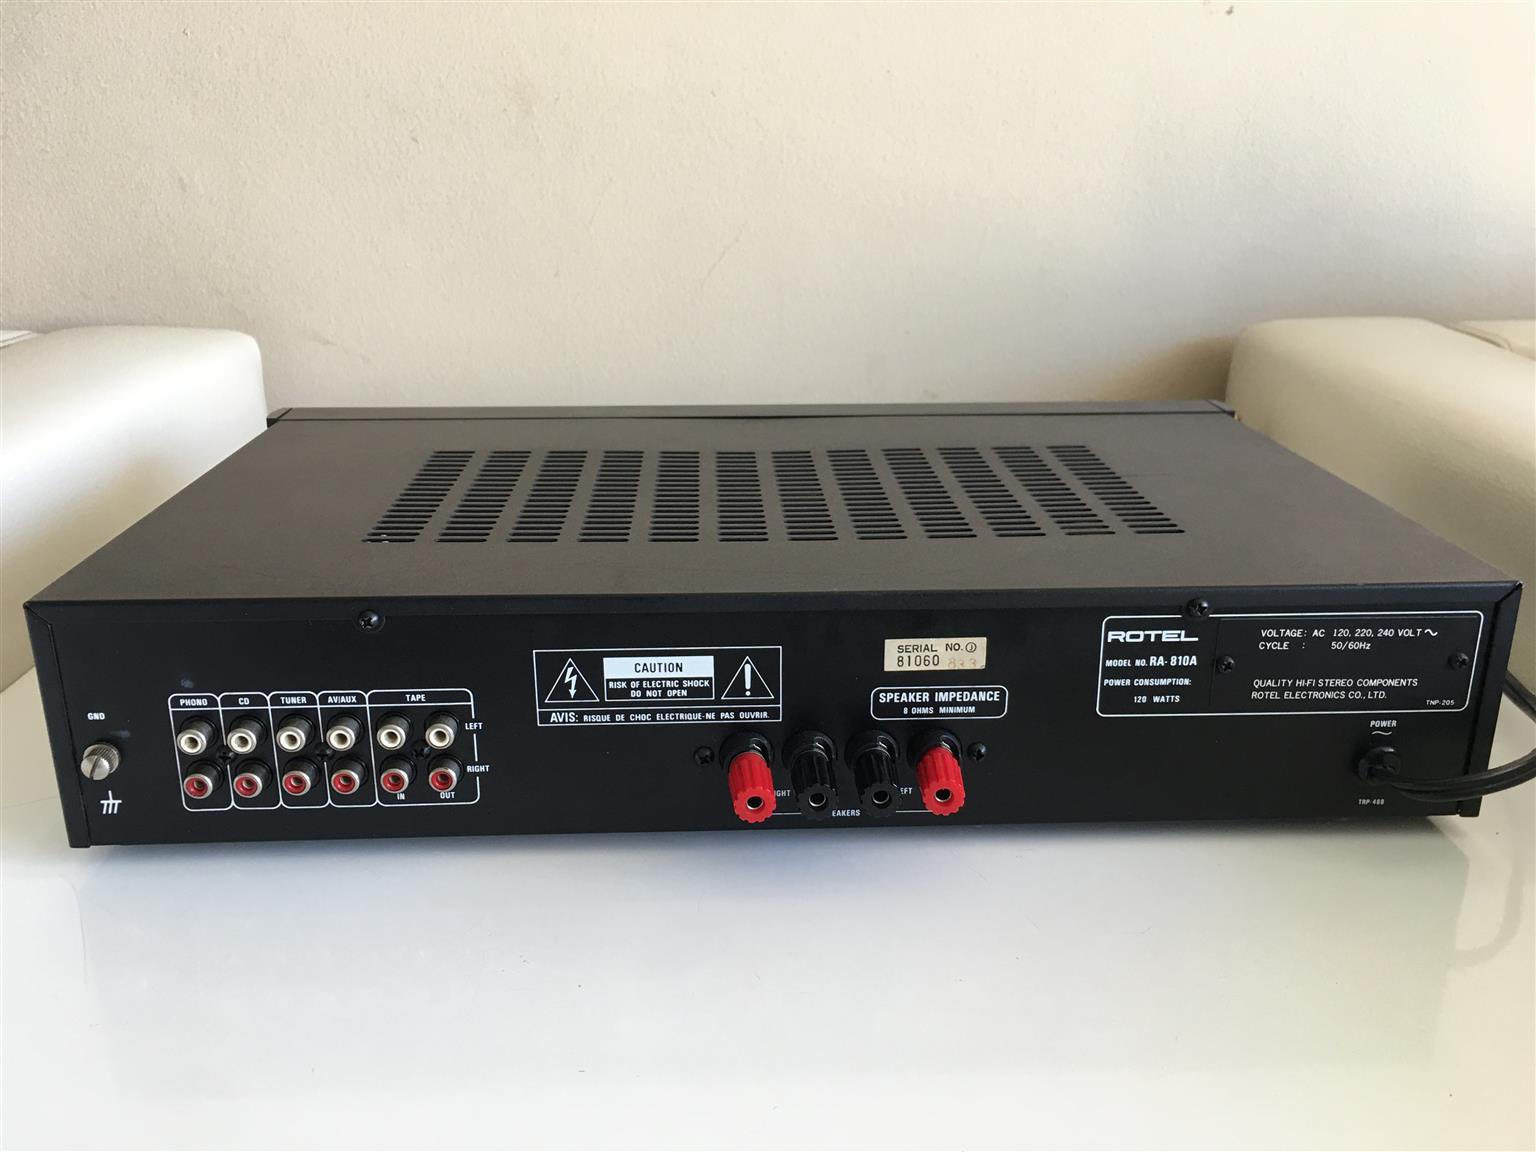 Rotel RA-810A Stereo Amplifier